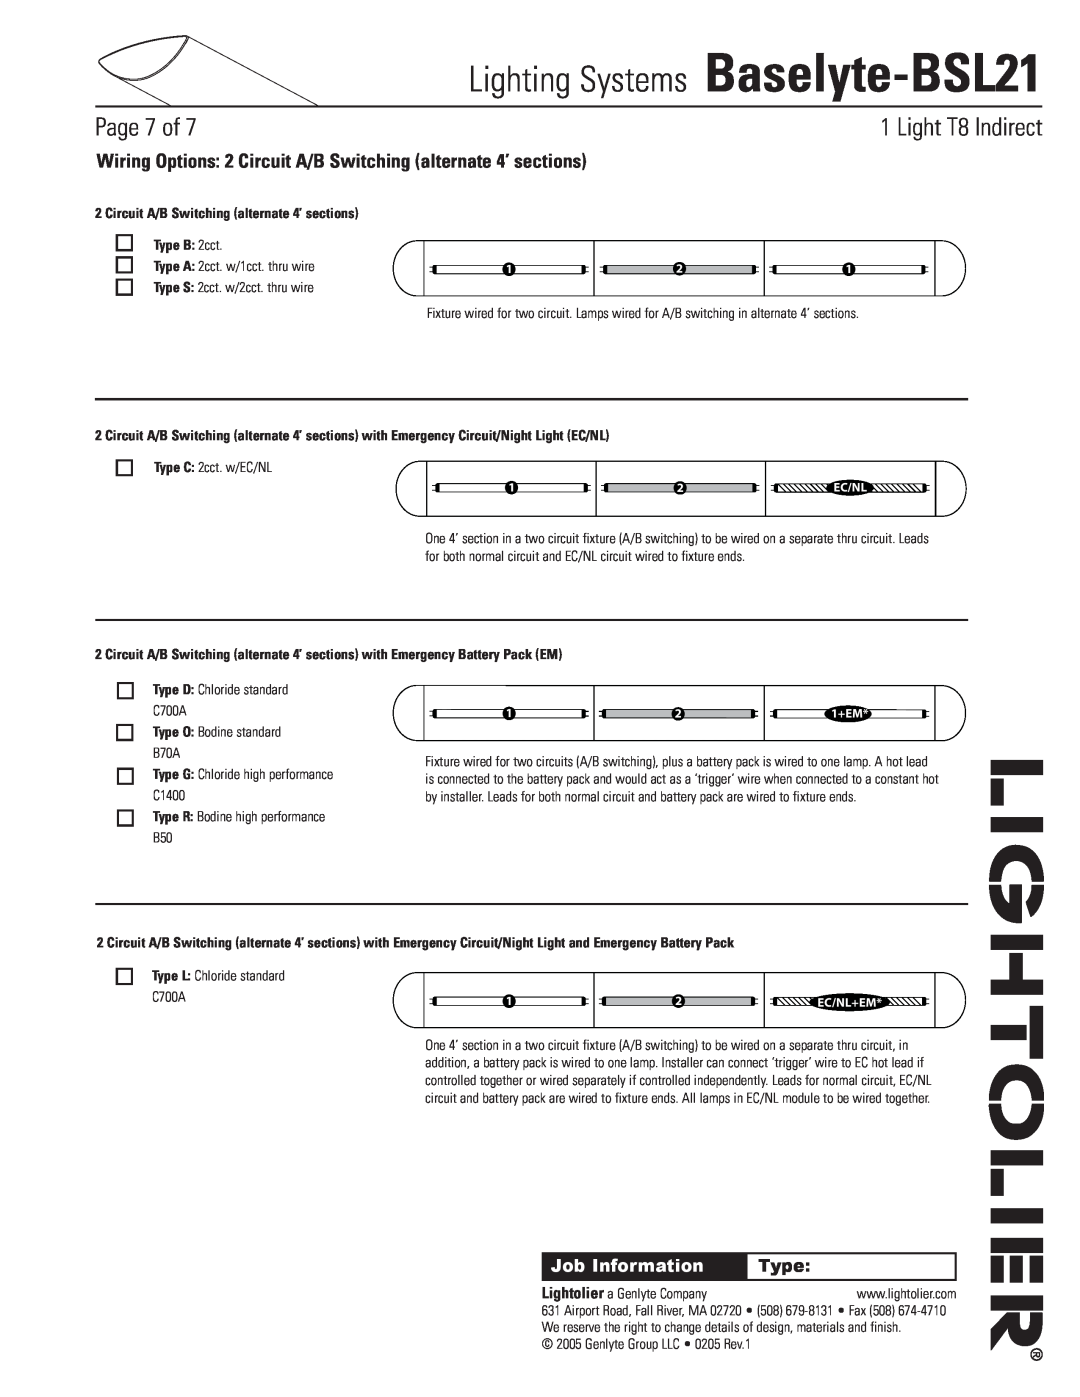 Lightolier Baselyte-BSL21 Circuit A/B Switching alternate 4’ sections, Type B 2cct, Type O Bodine standard B70A, Page of 